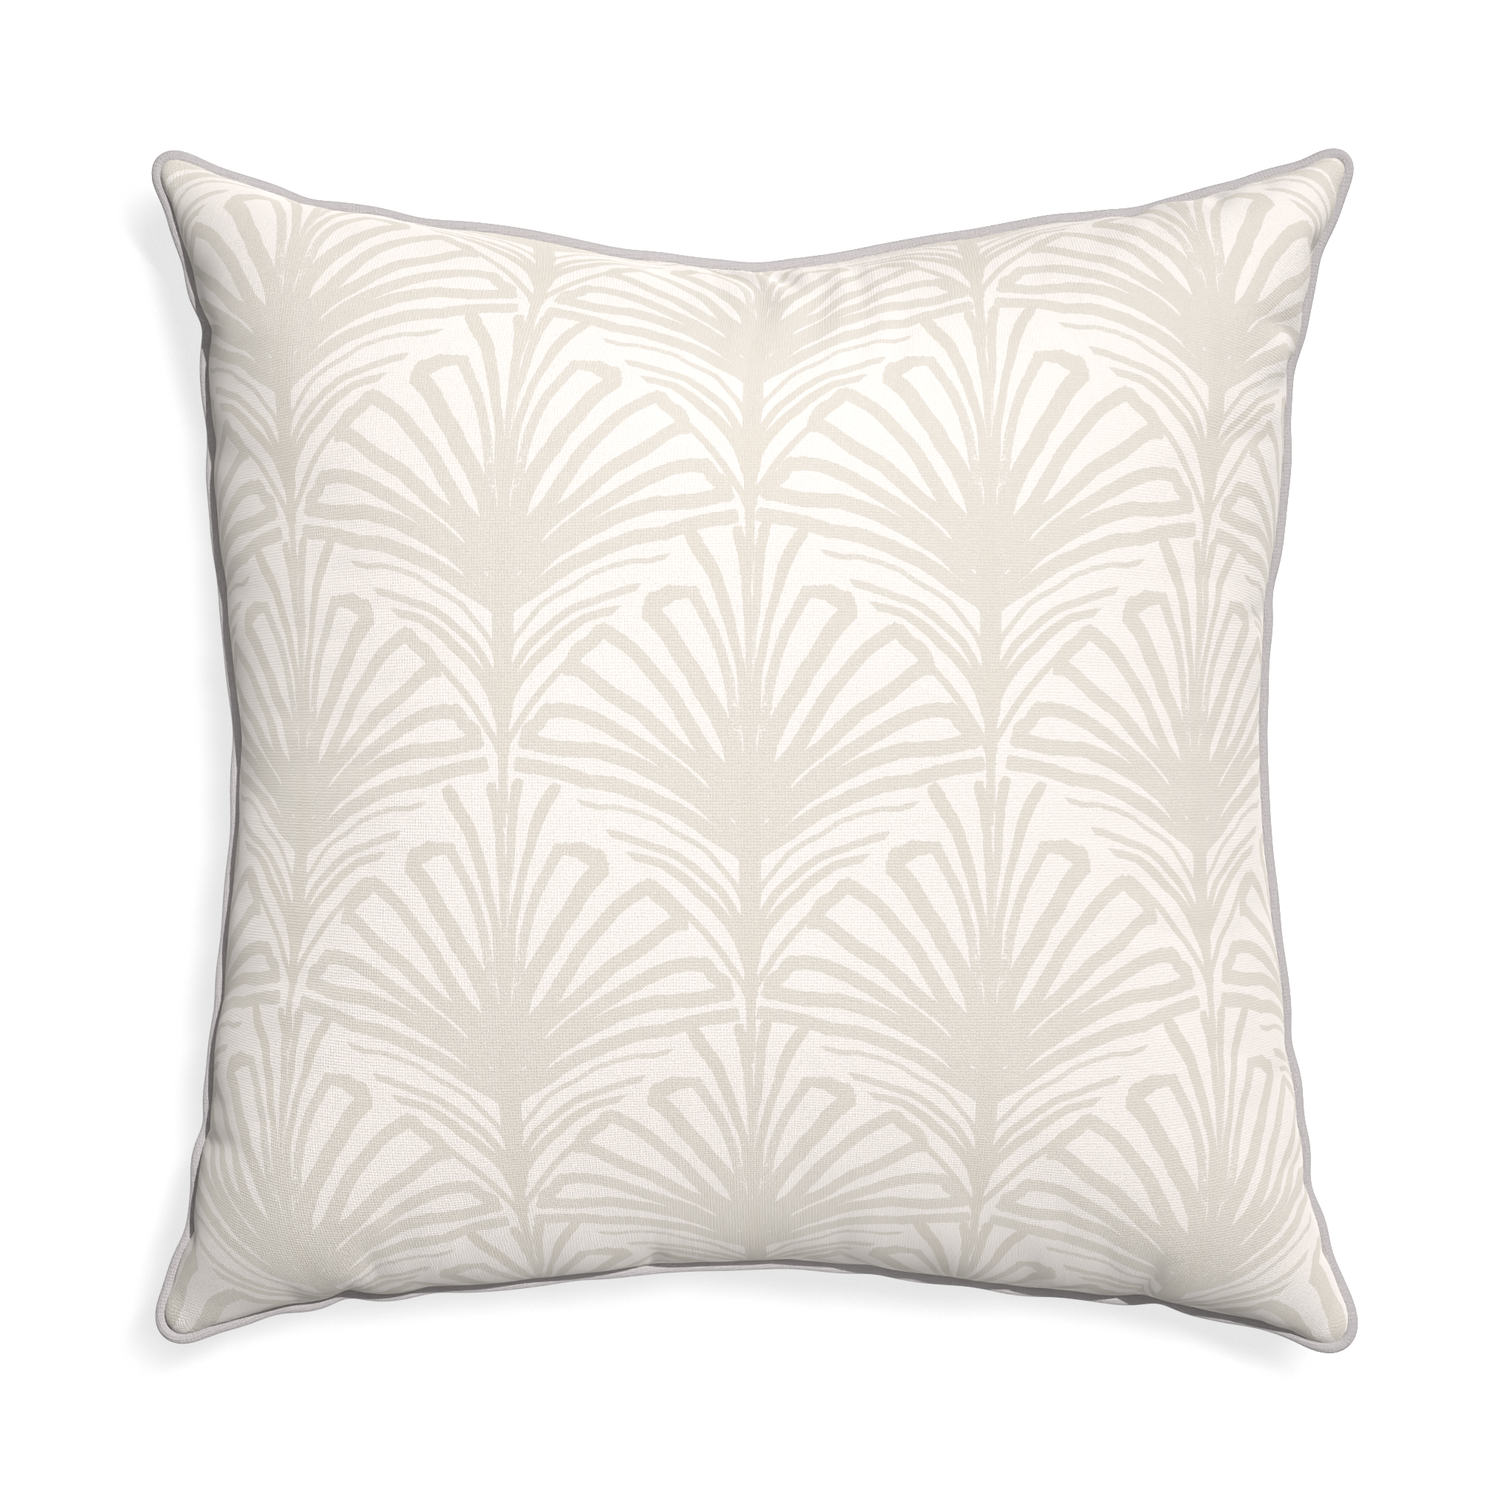 Euro-sham suzy sand custom pillow with pebble piping on white background